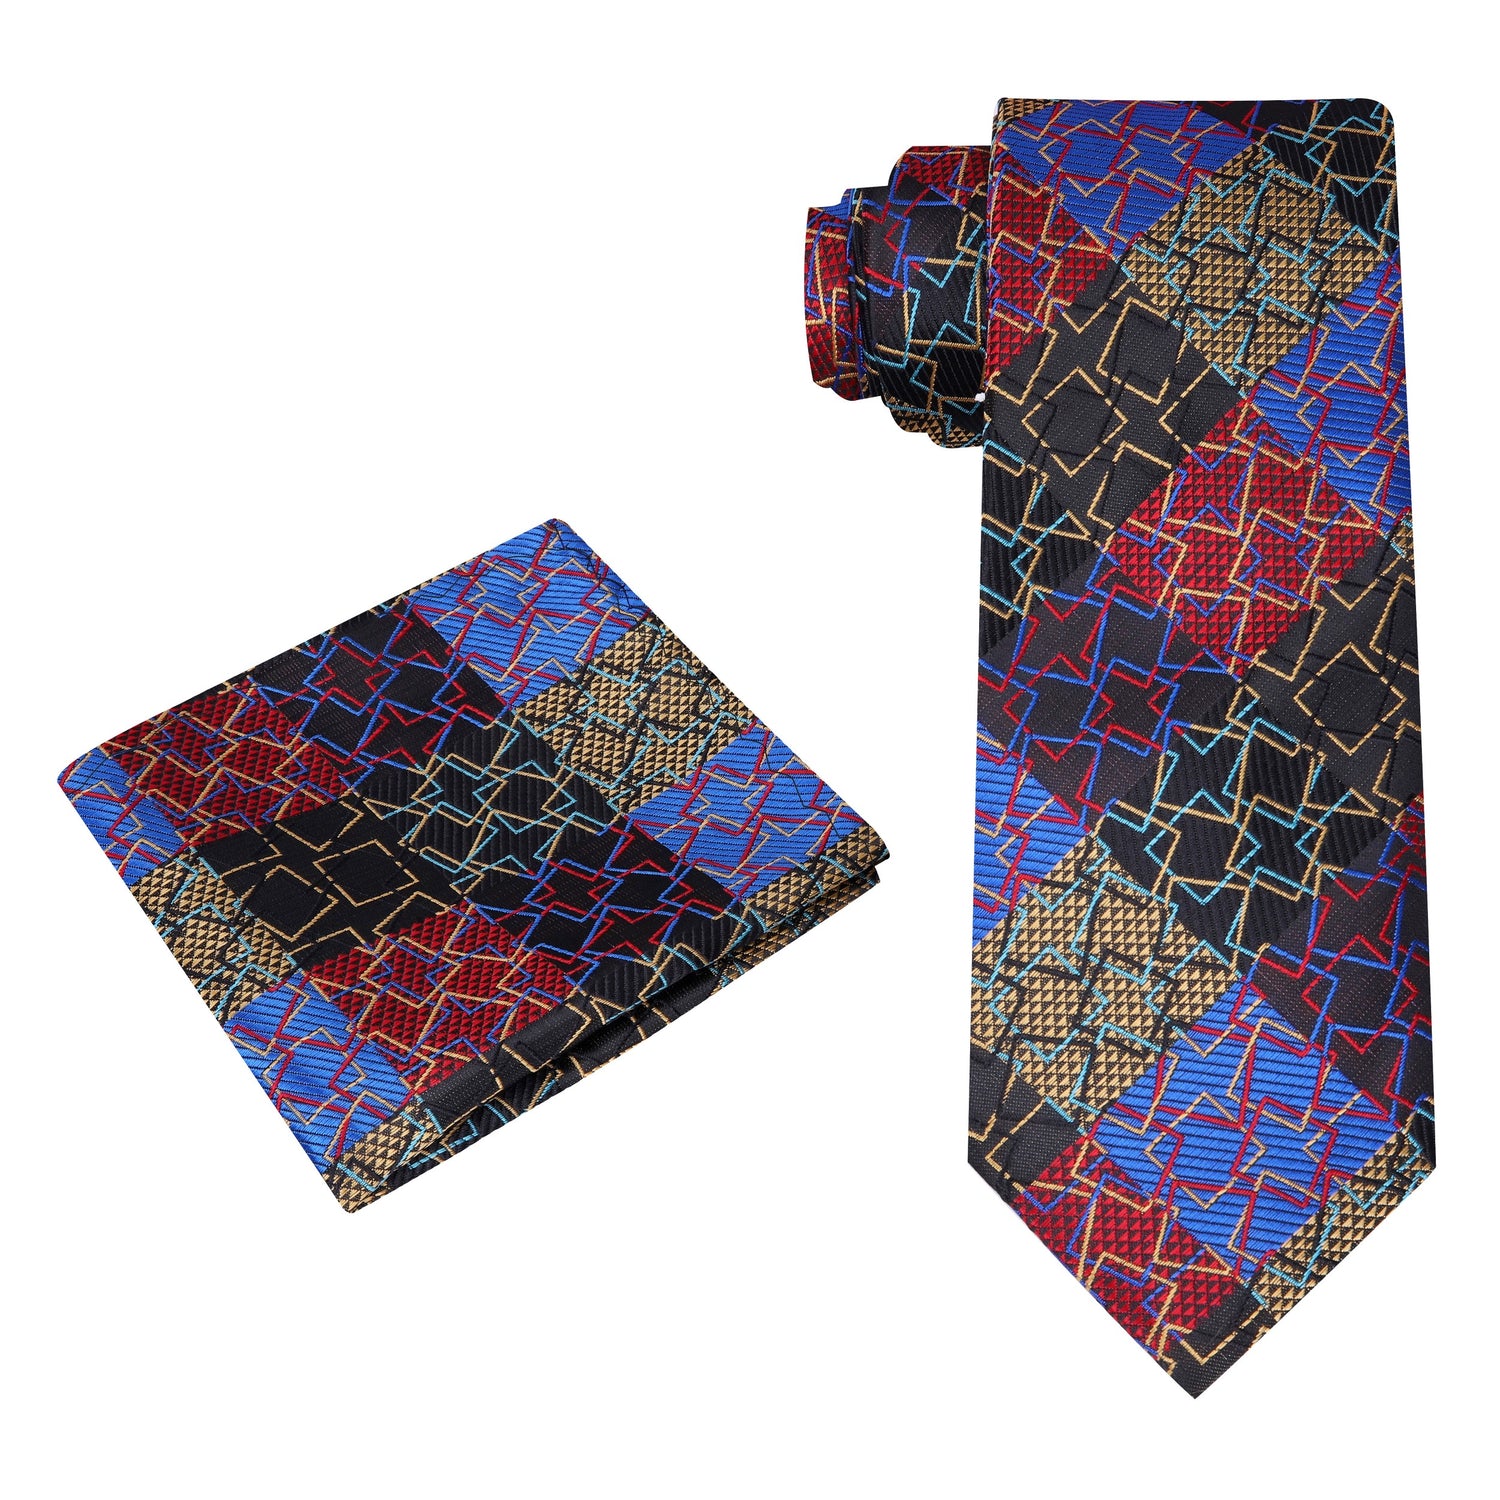 View 2: A Red, Blue, Yellow Geometric Abstract Diamond Pattern Silk Necktie, Matching Pocket Square